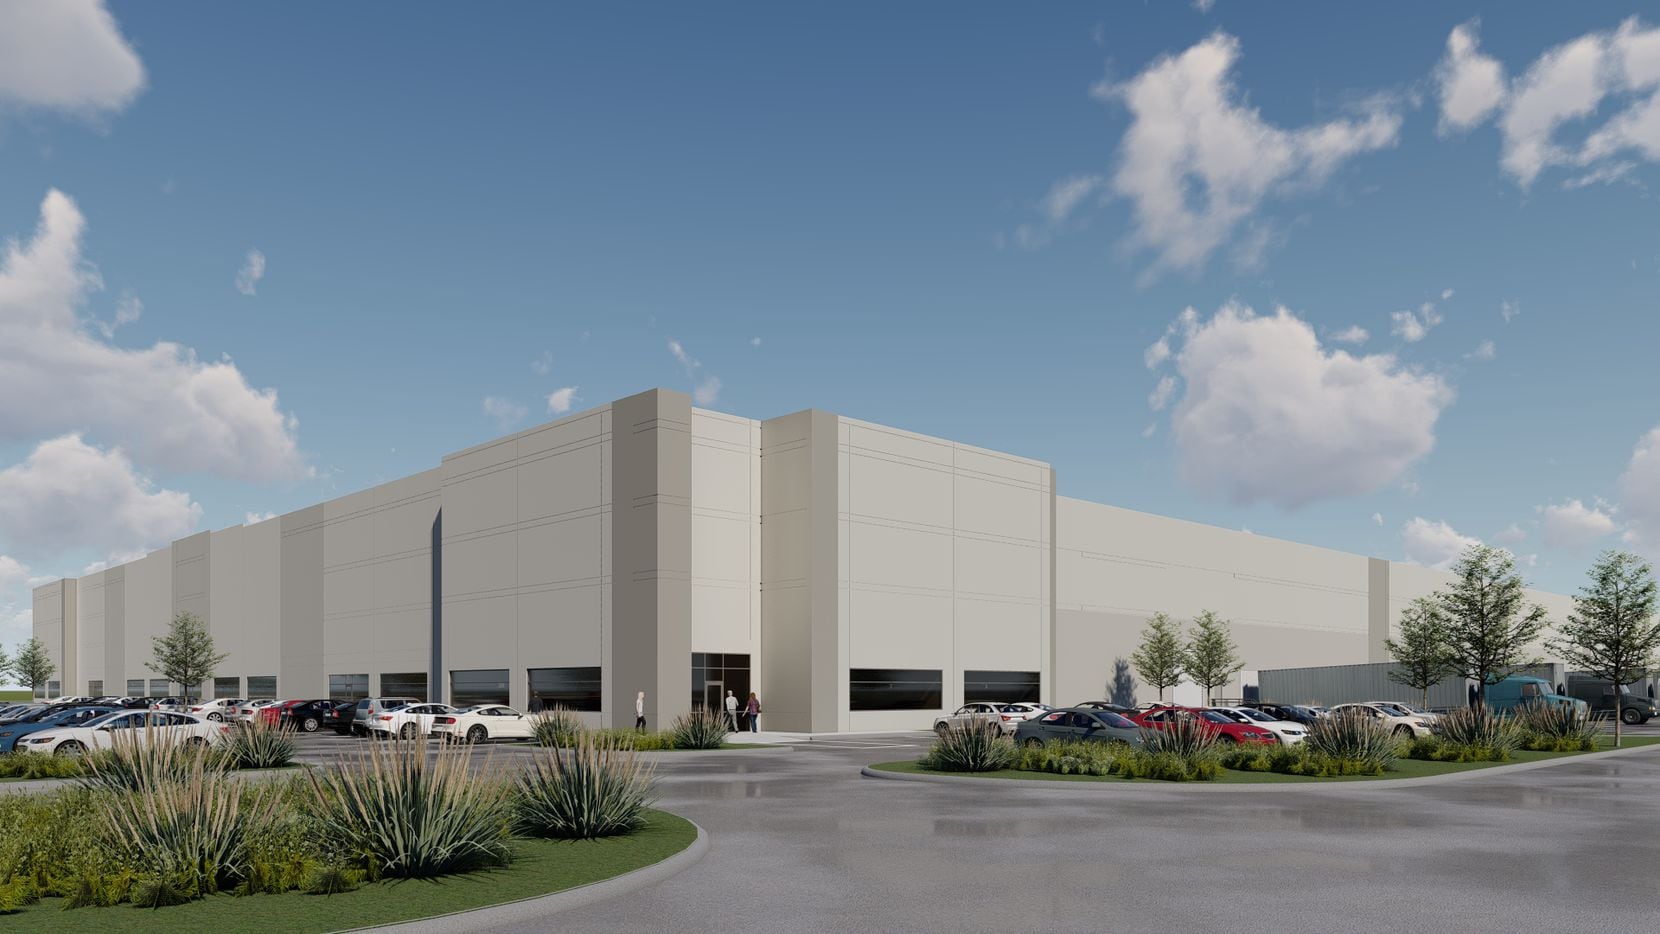 Dalfen Industrial is also developing several warehouse projects in Mesquite.